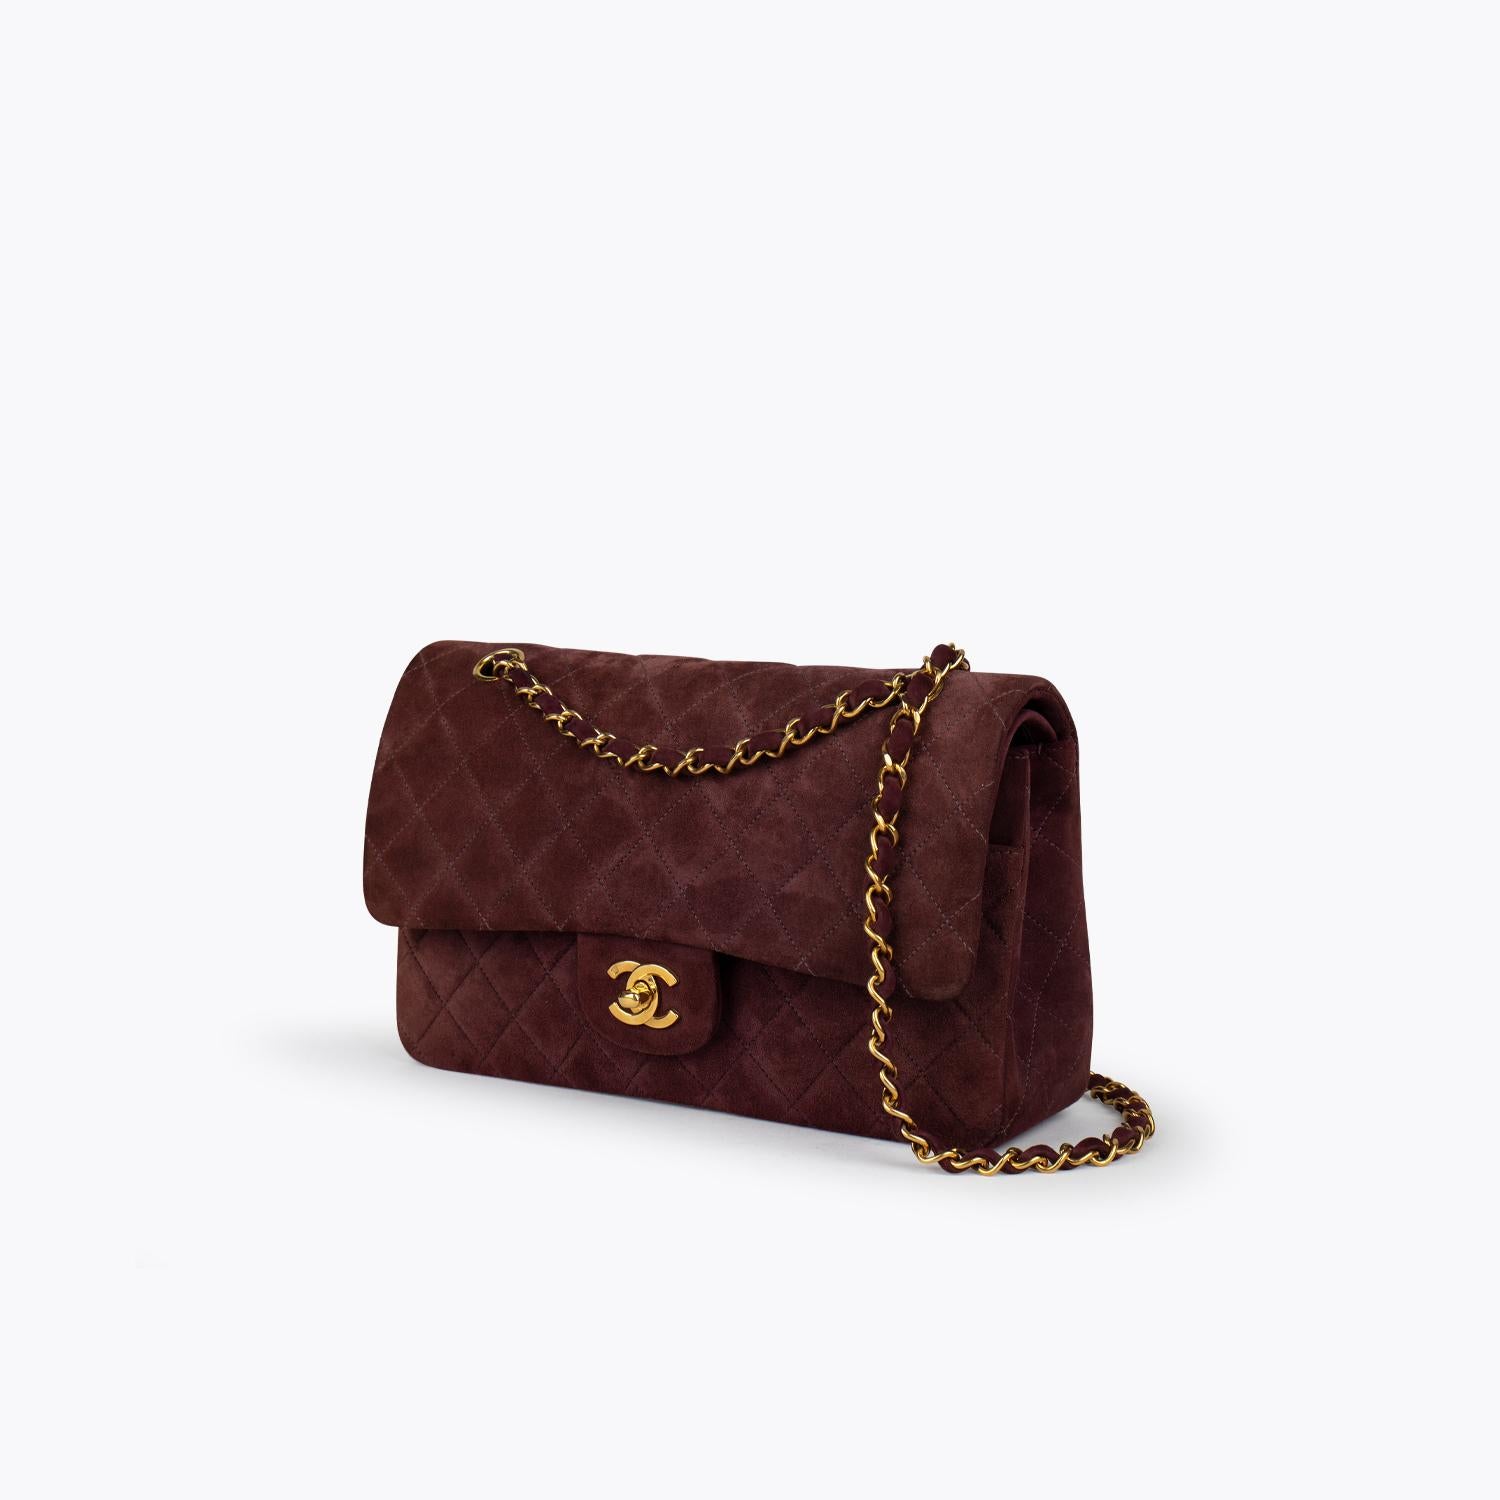 Wine red quilted suede Chanel Medium Classic/Timeless Double Flap bag with

– Gold-tone hardware
– Convertible chain-link and suede shoulder strap
– Tonal leather lining
– Single patch pocket at back
– Single zip pocket at flap underside, three